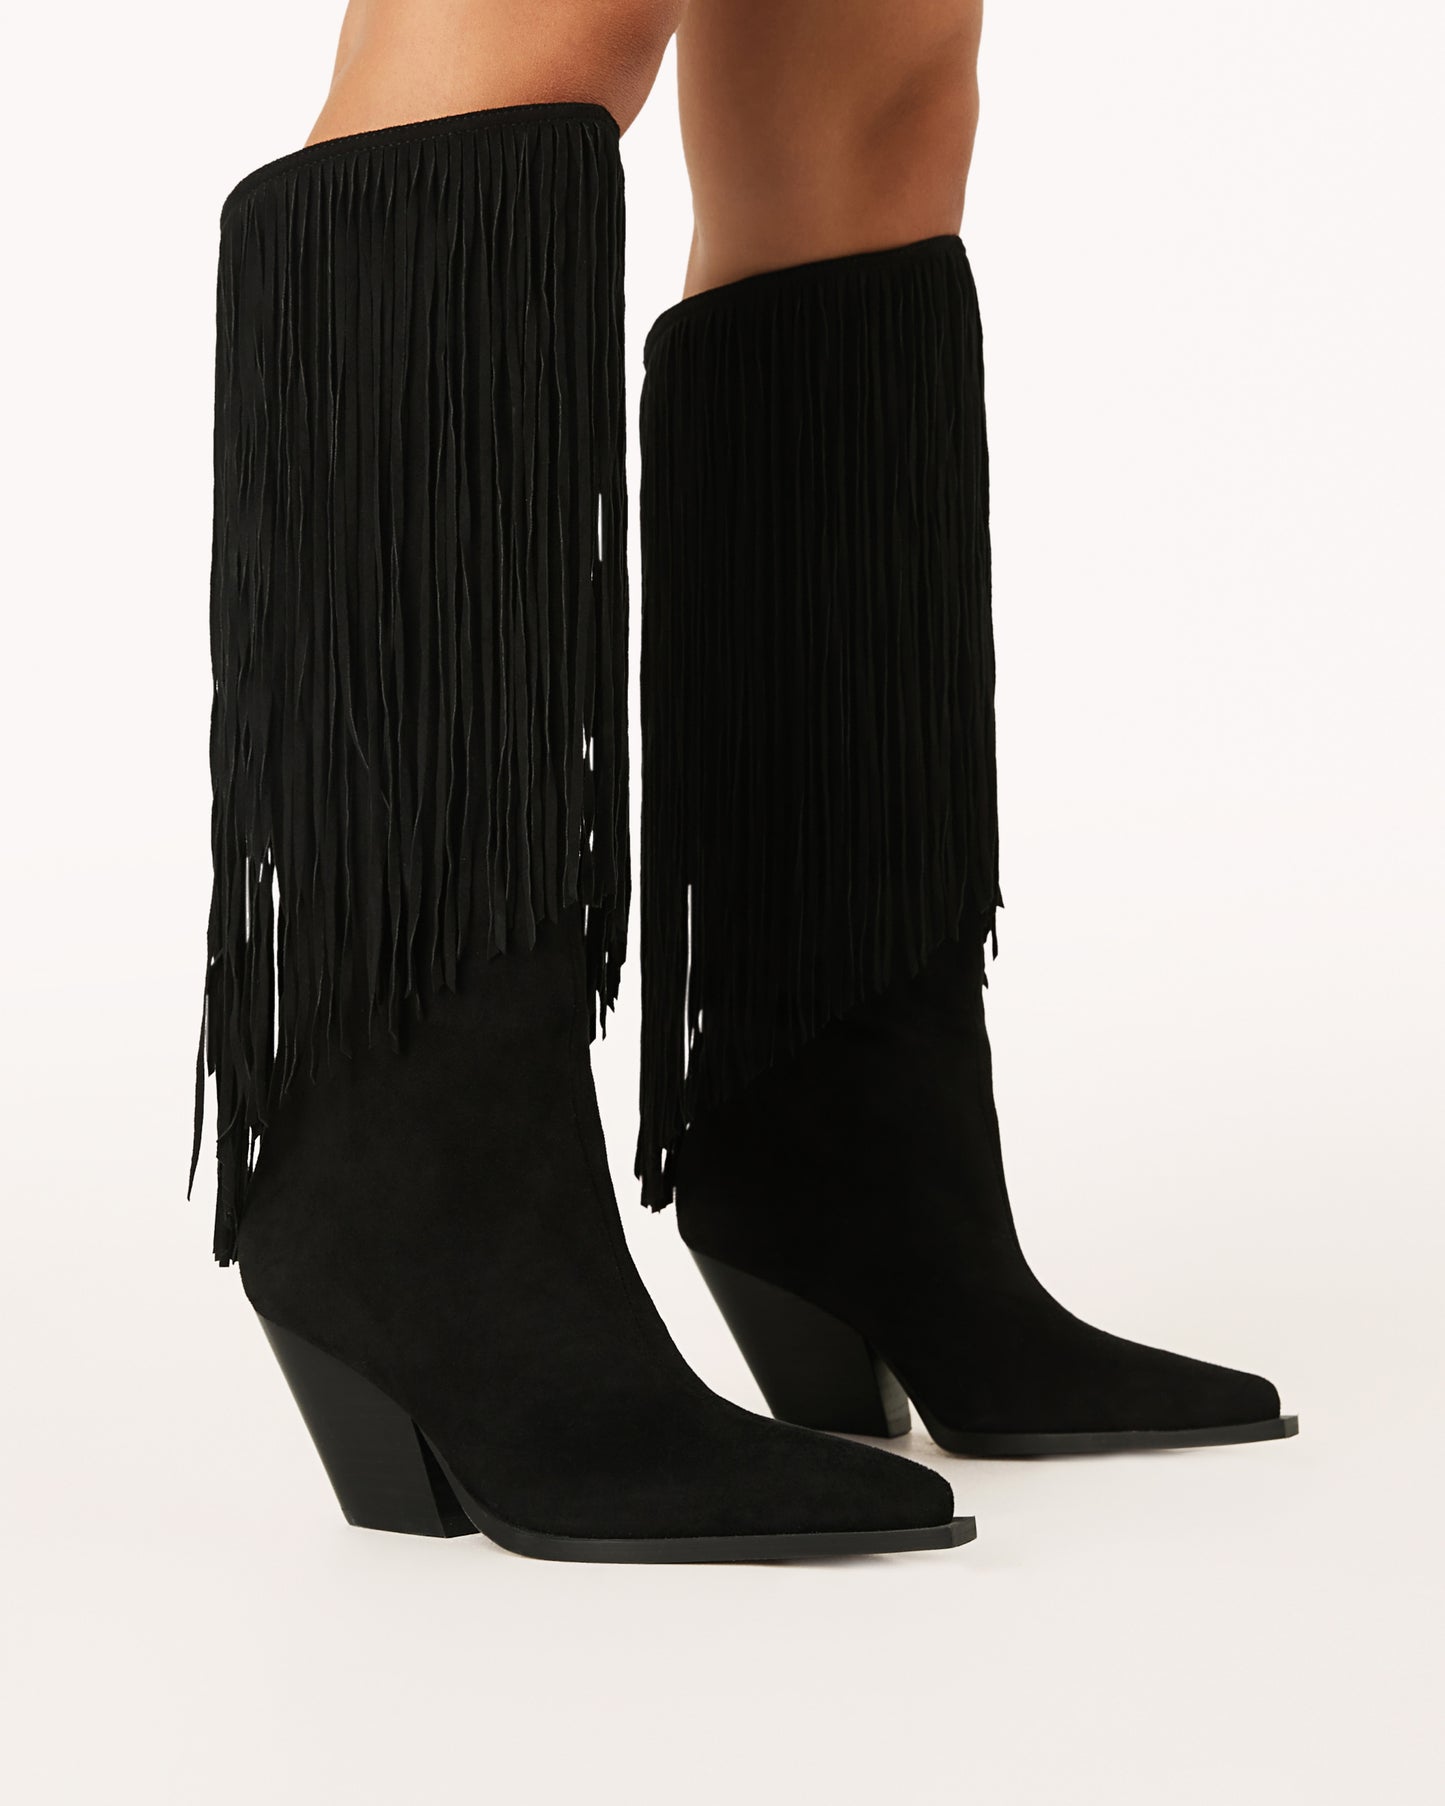 Evette Boots